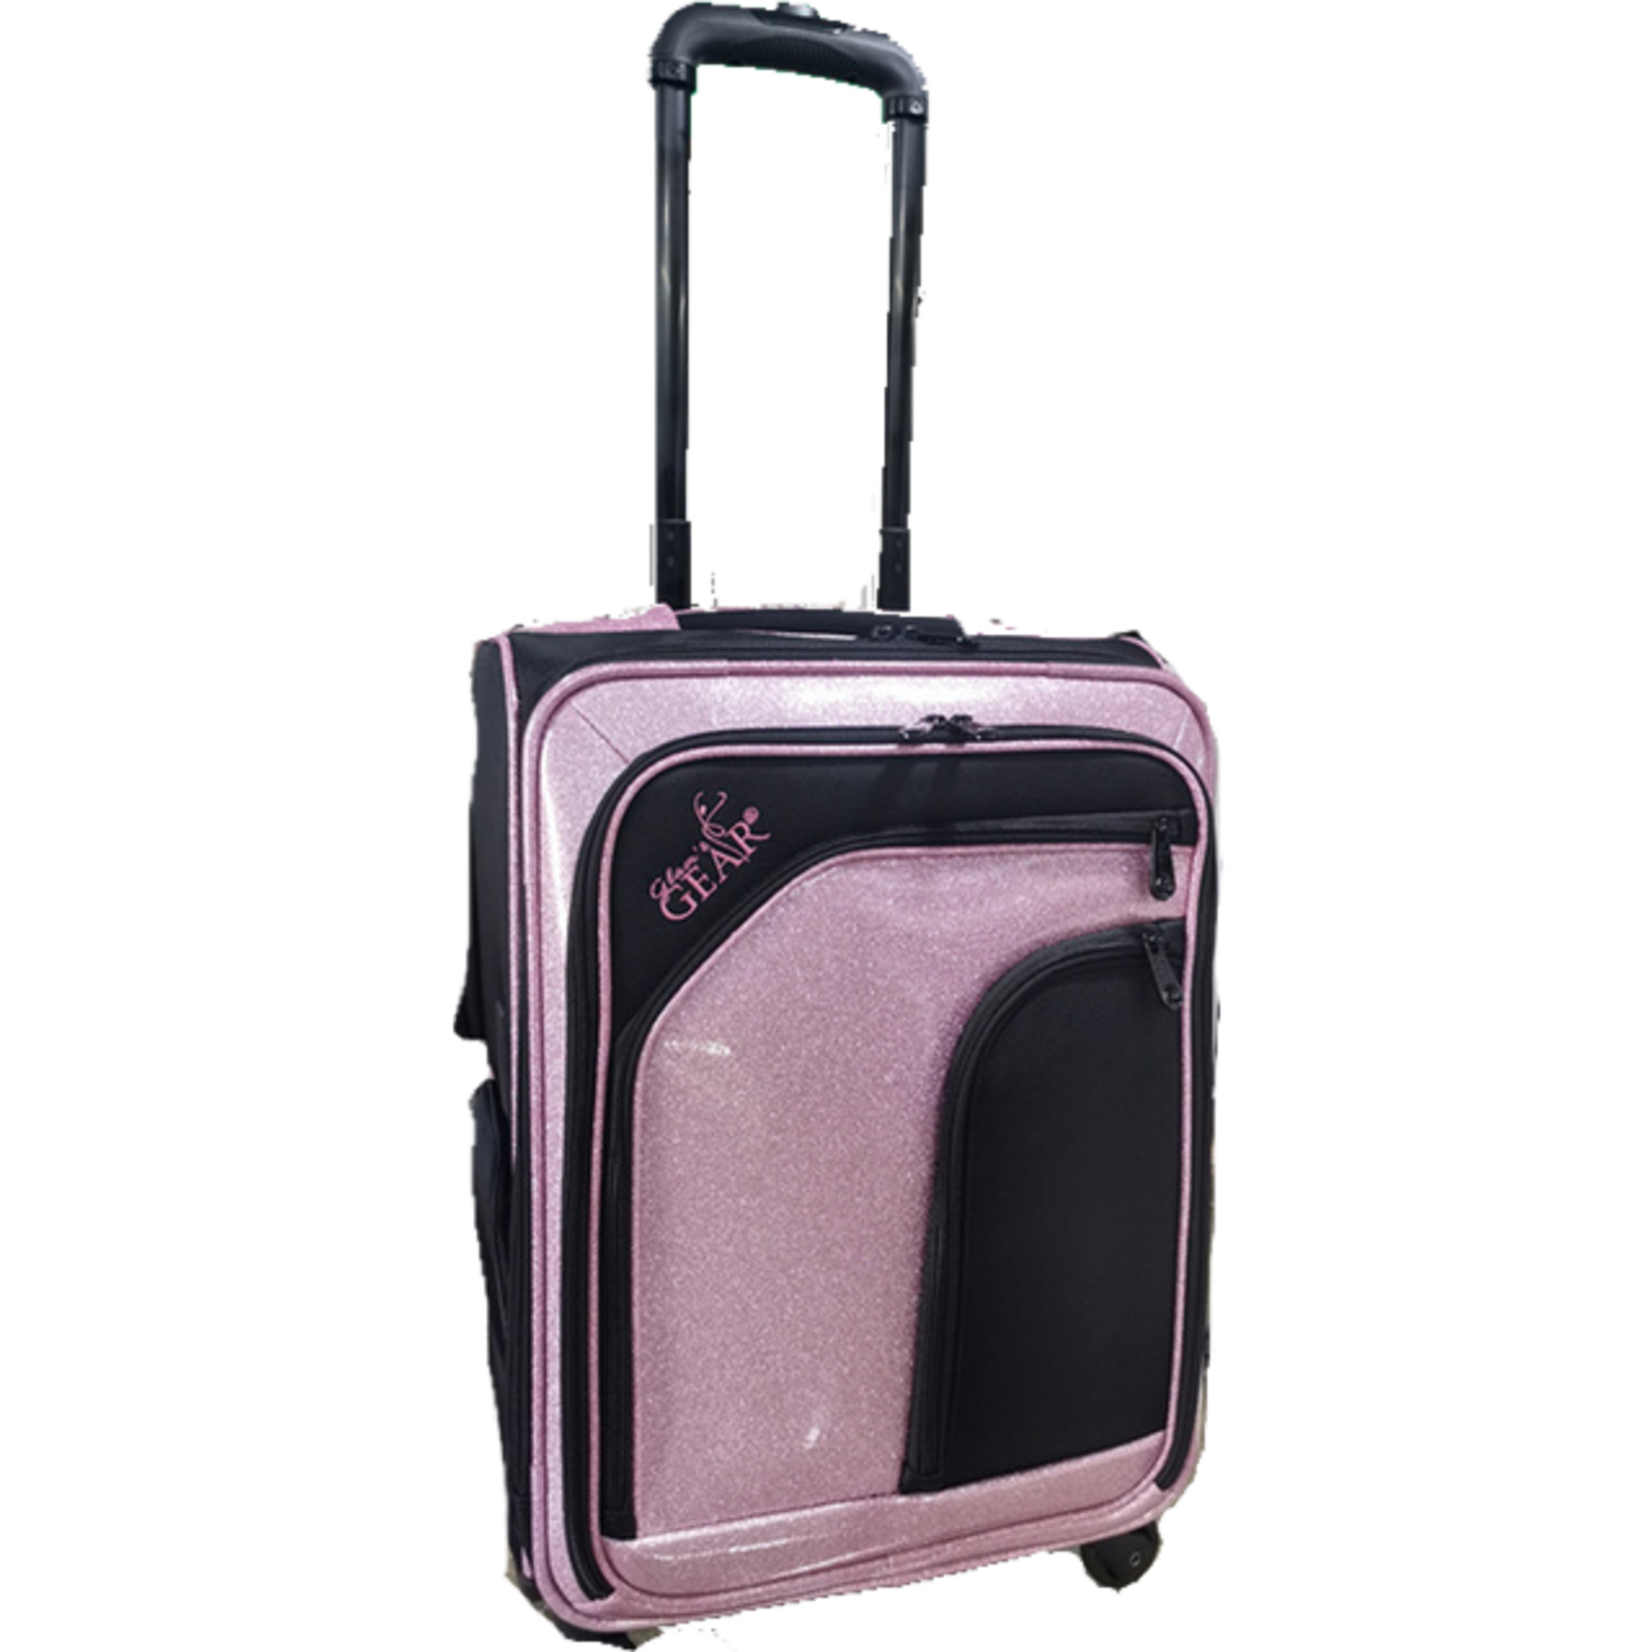 Glam'r Gear Glam'r Gear Solo Carry On With Rack